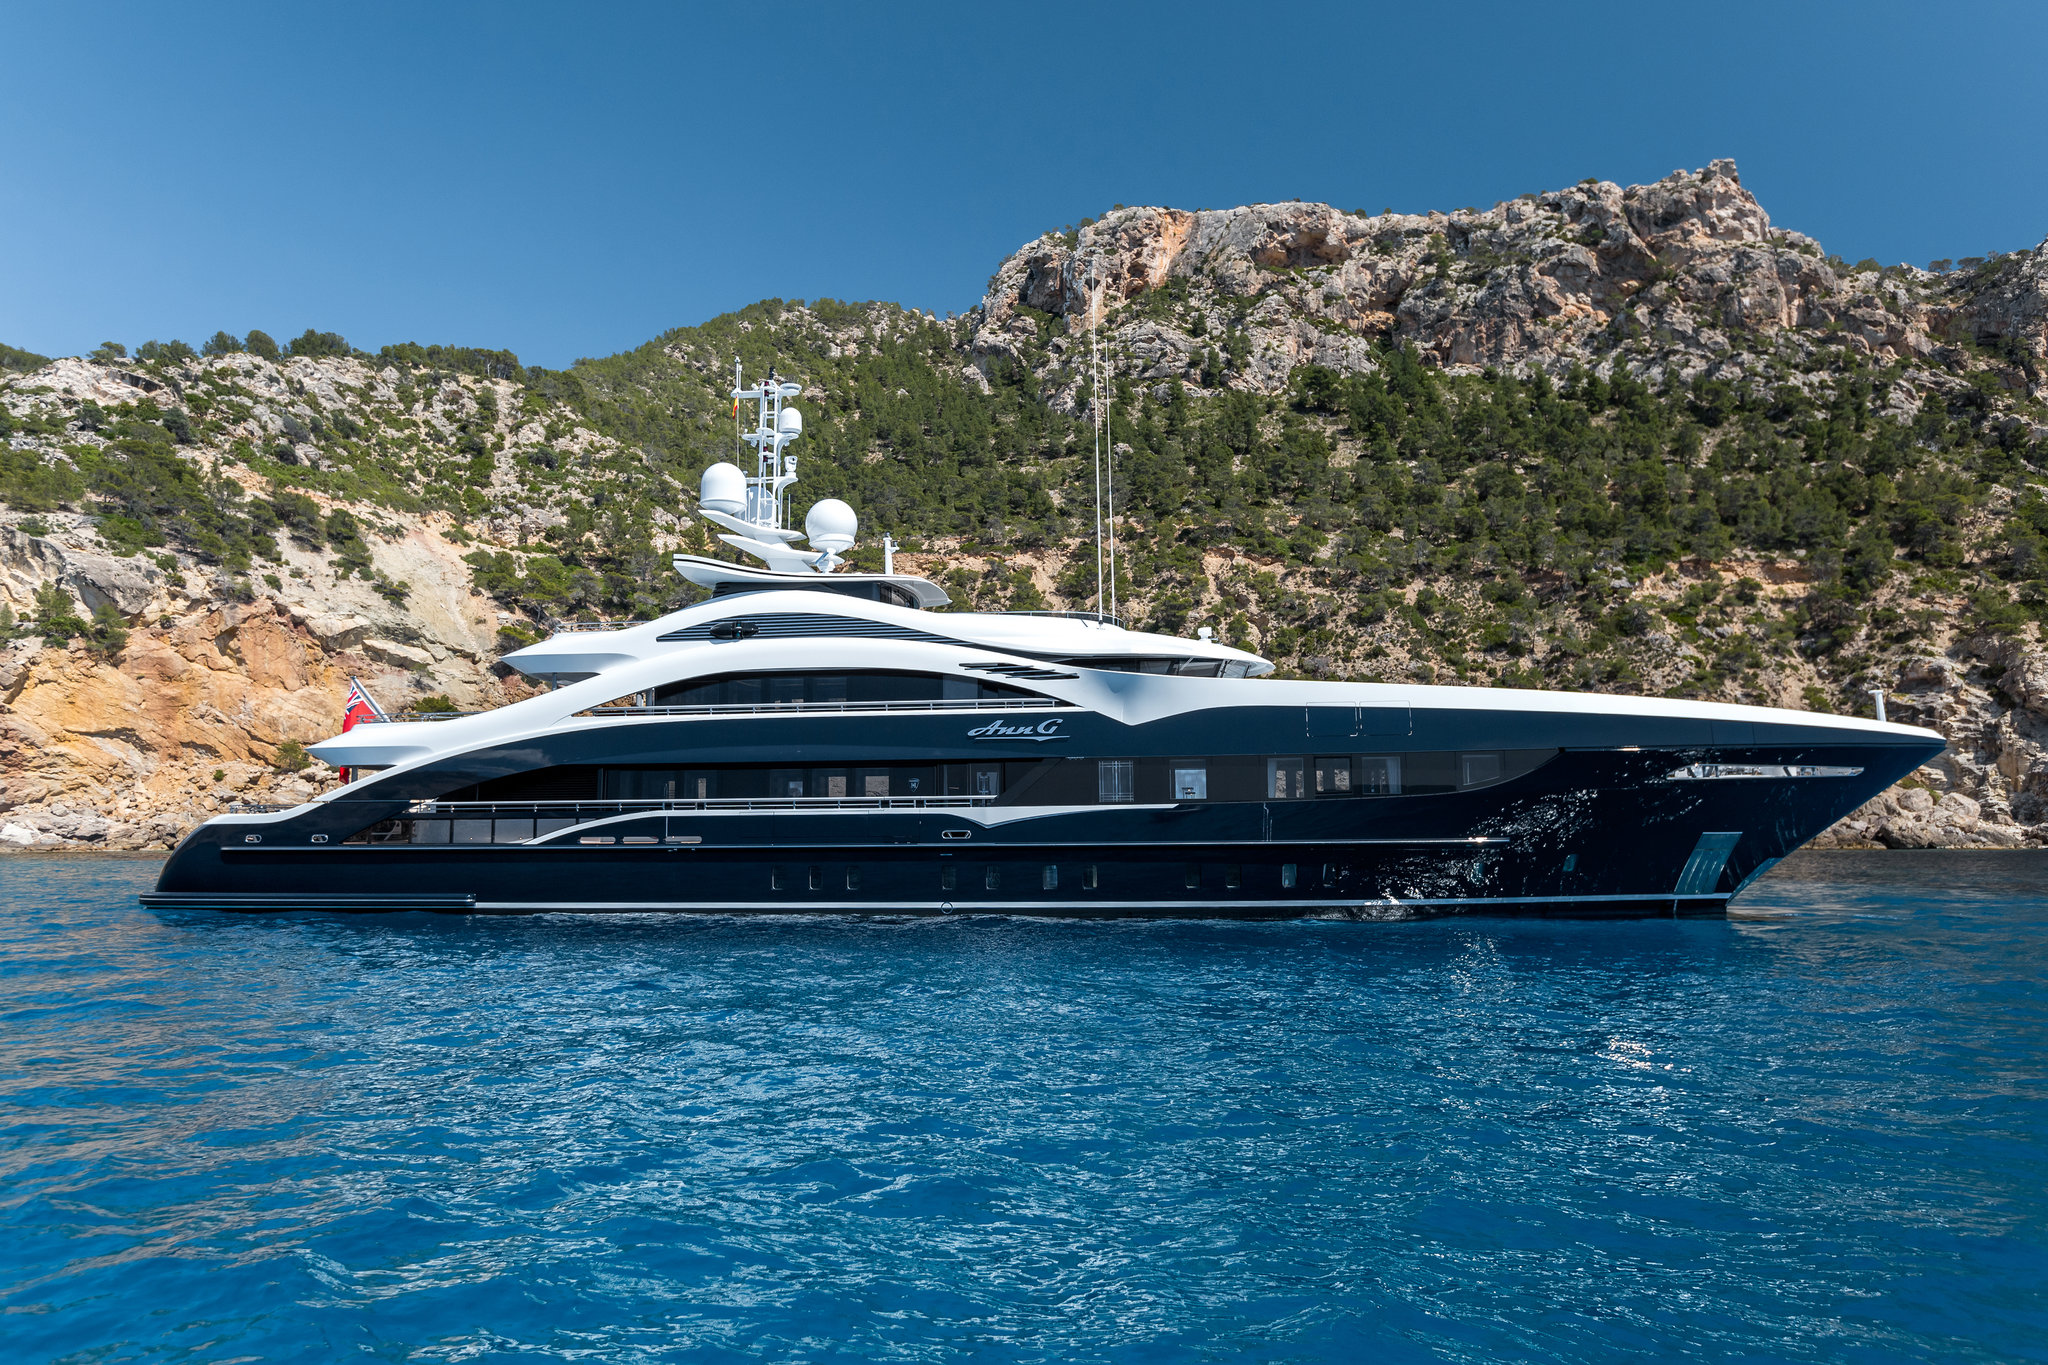 What Is the History of Superyachts